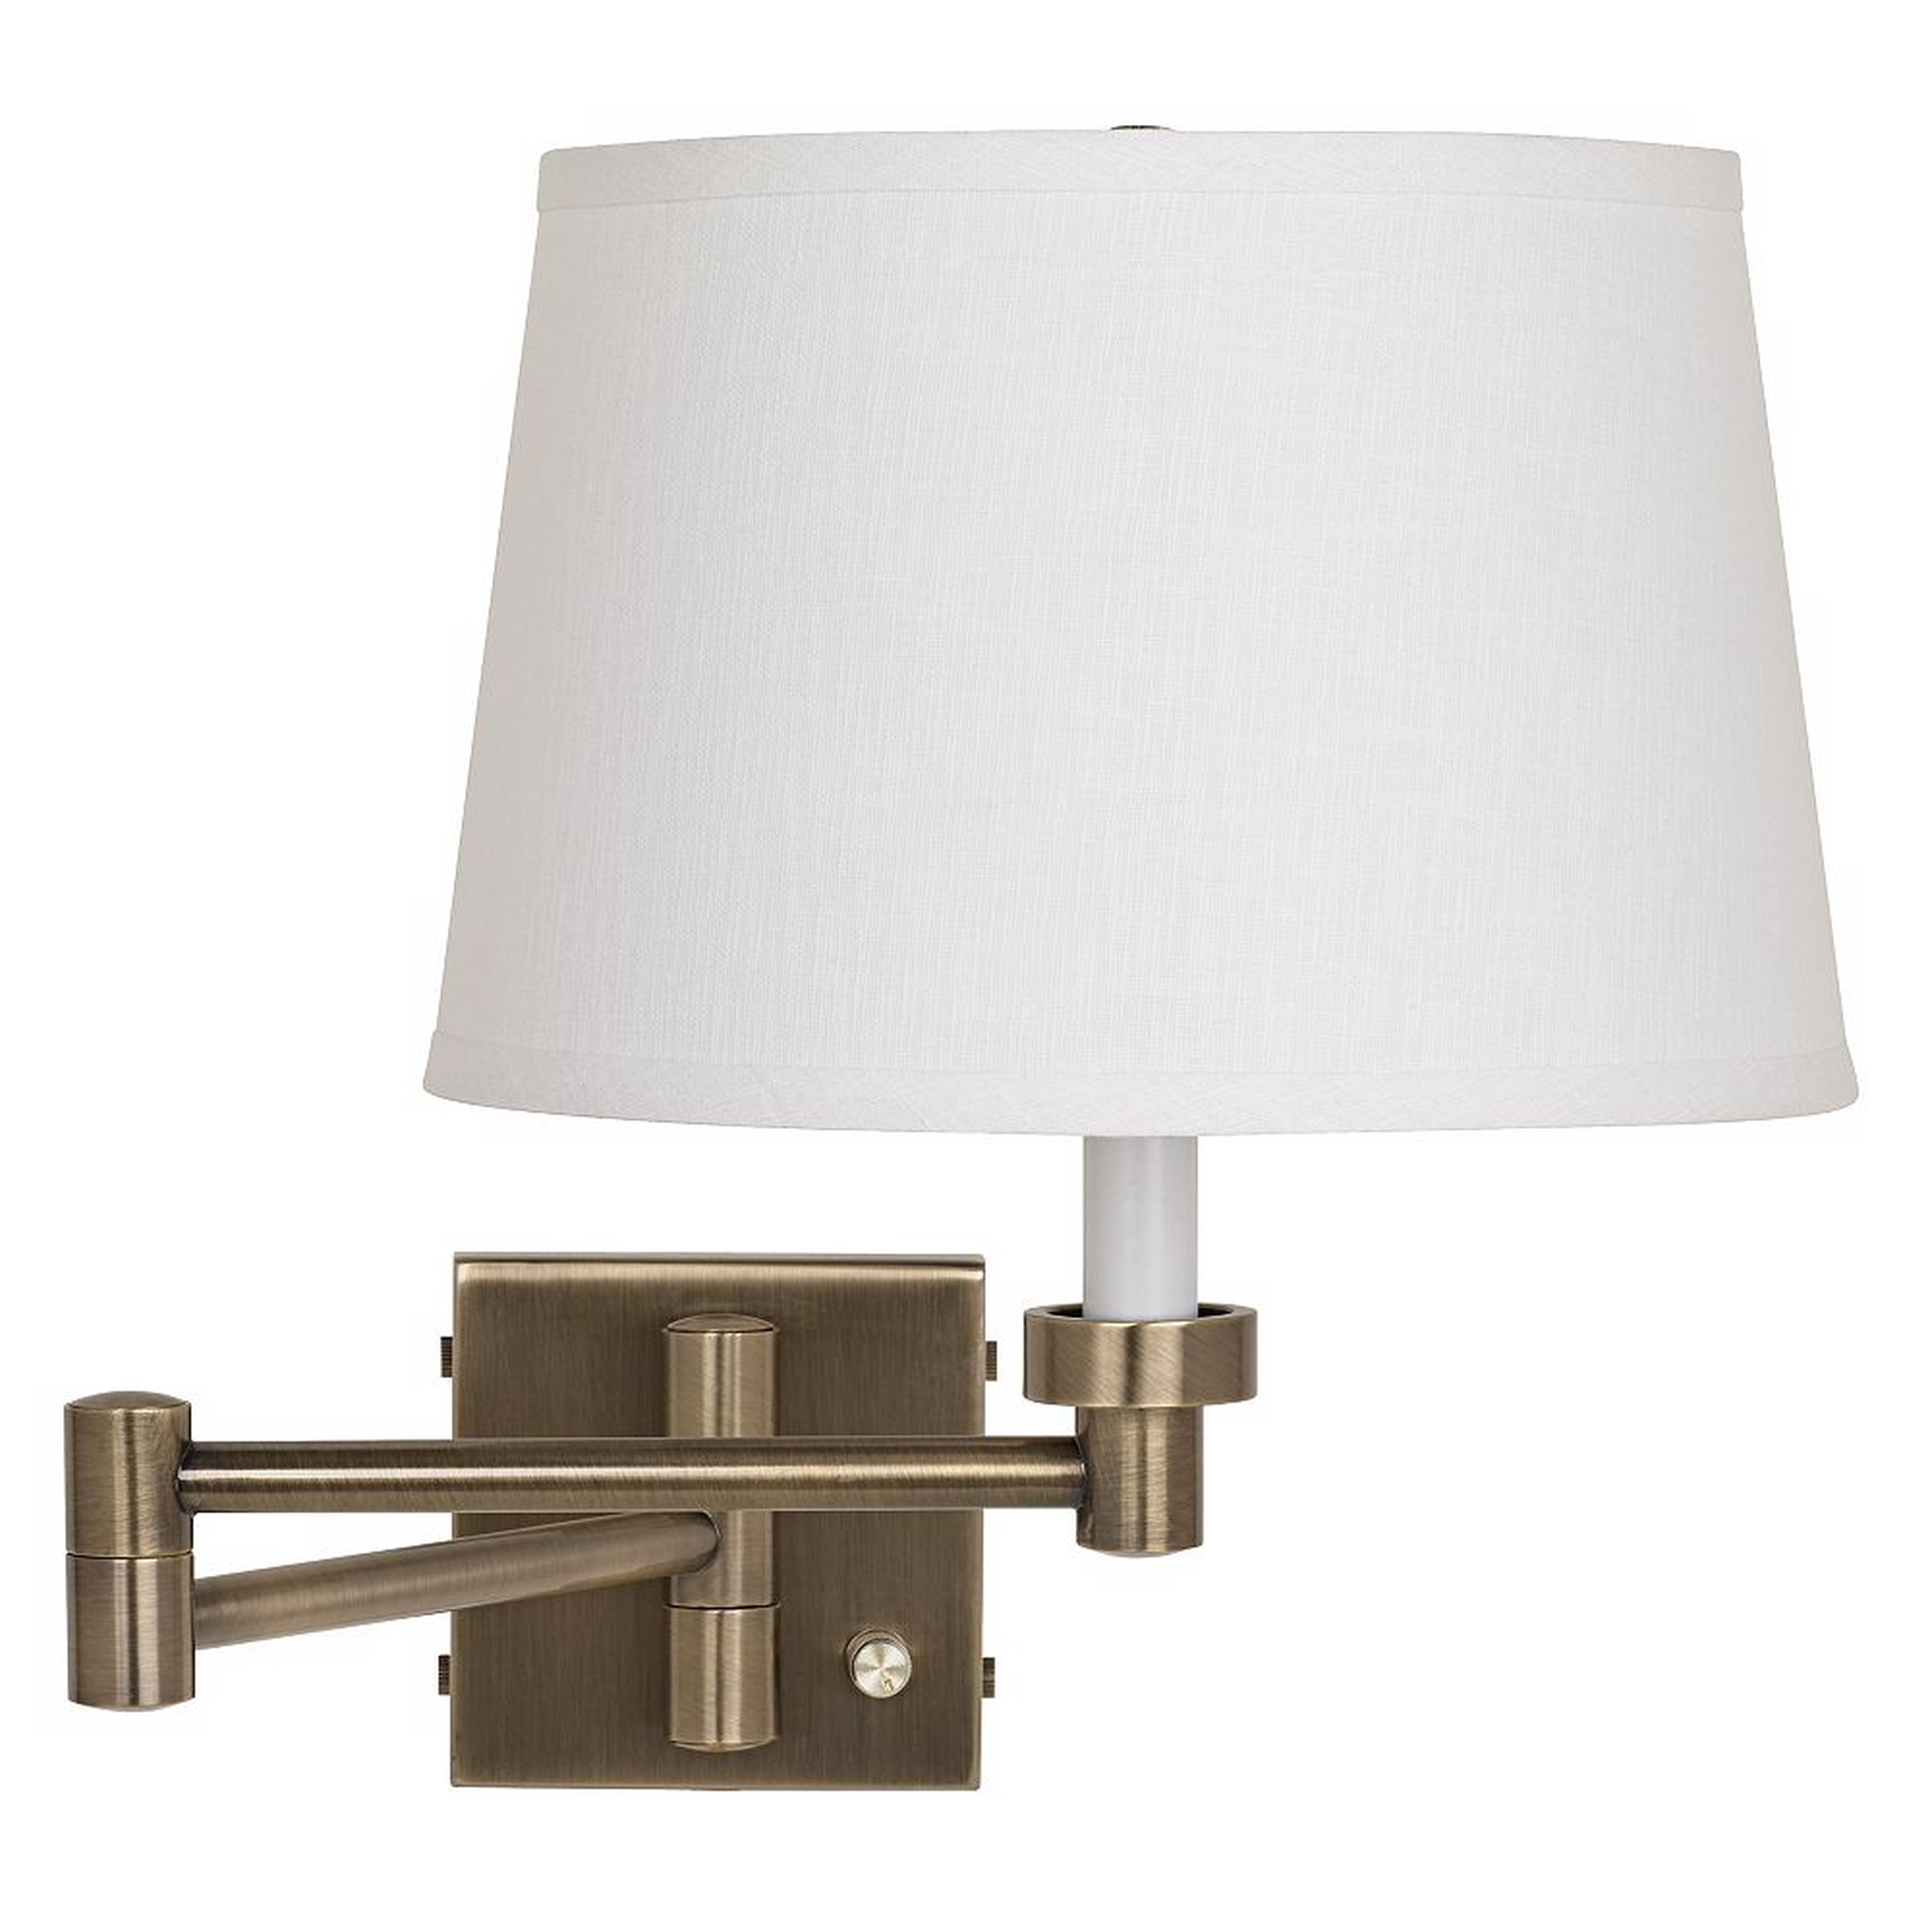 Antique Brass with White Linen Shade Plug-In Swing Arm Wall Lamp - Style # 17A71 - Lamps Plus